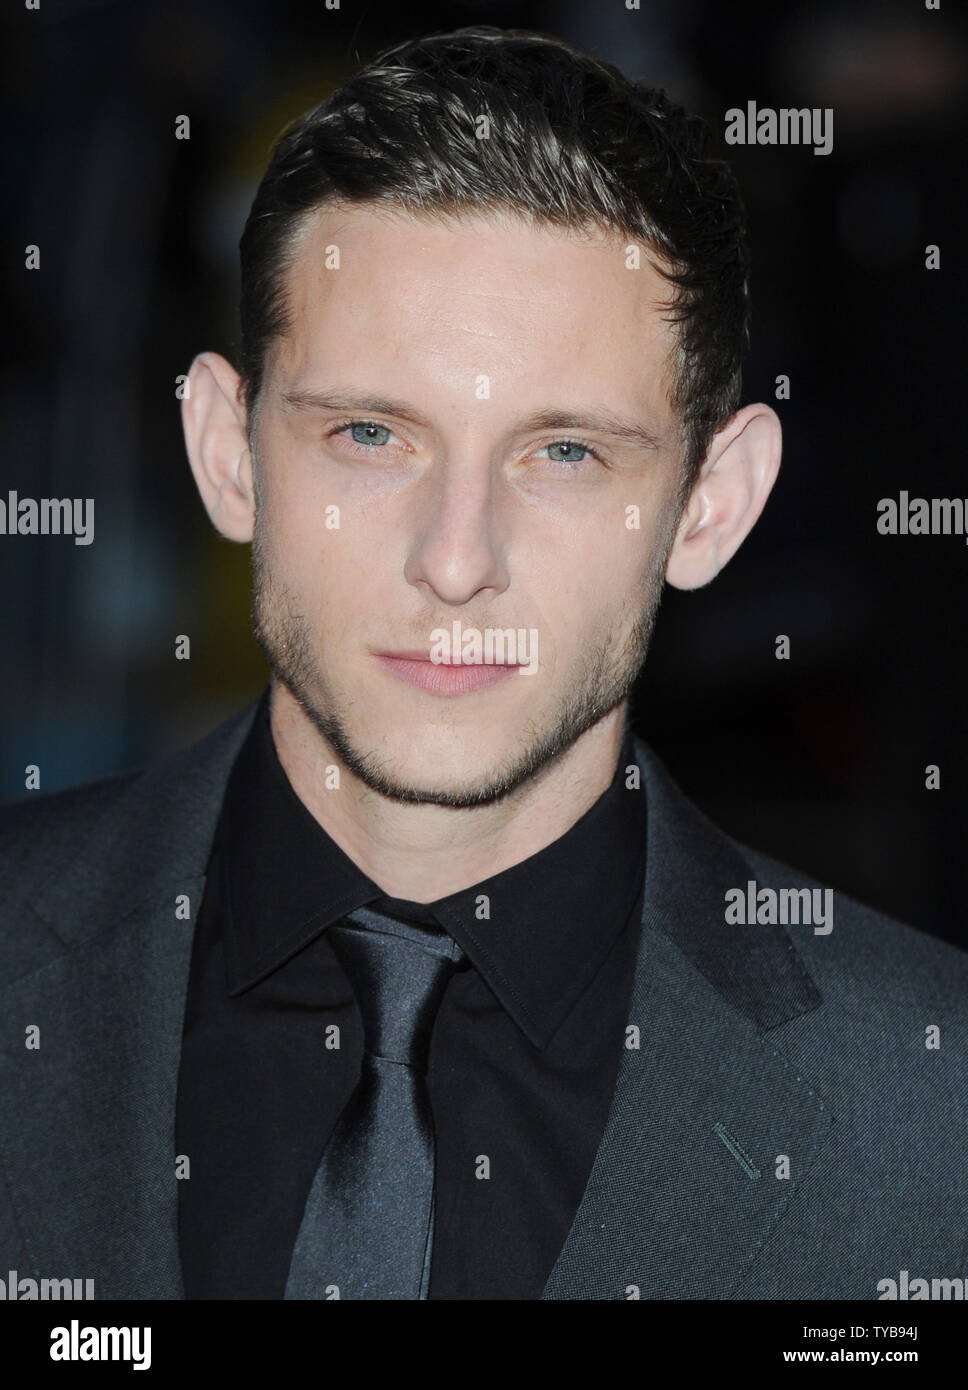 British actor Jamie Bell attends the premiere of 'The Adventures Of Tintin: The Secret Of The Unicorn'  at Odeon West End in London on October 23, 2011.     UPI/Rune Hellestad Stock Photo